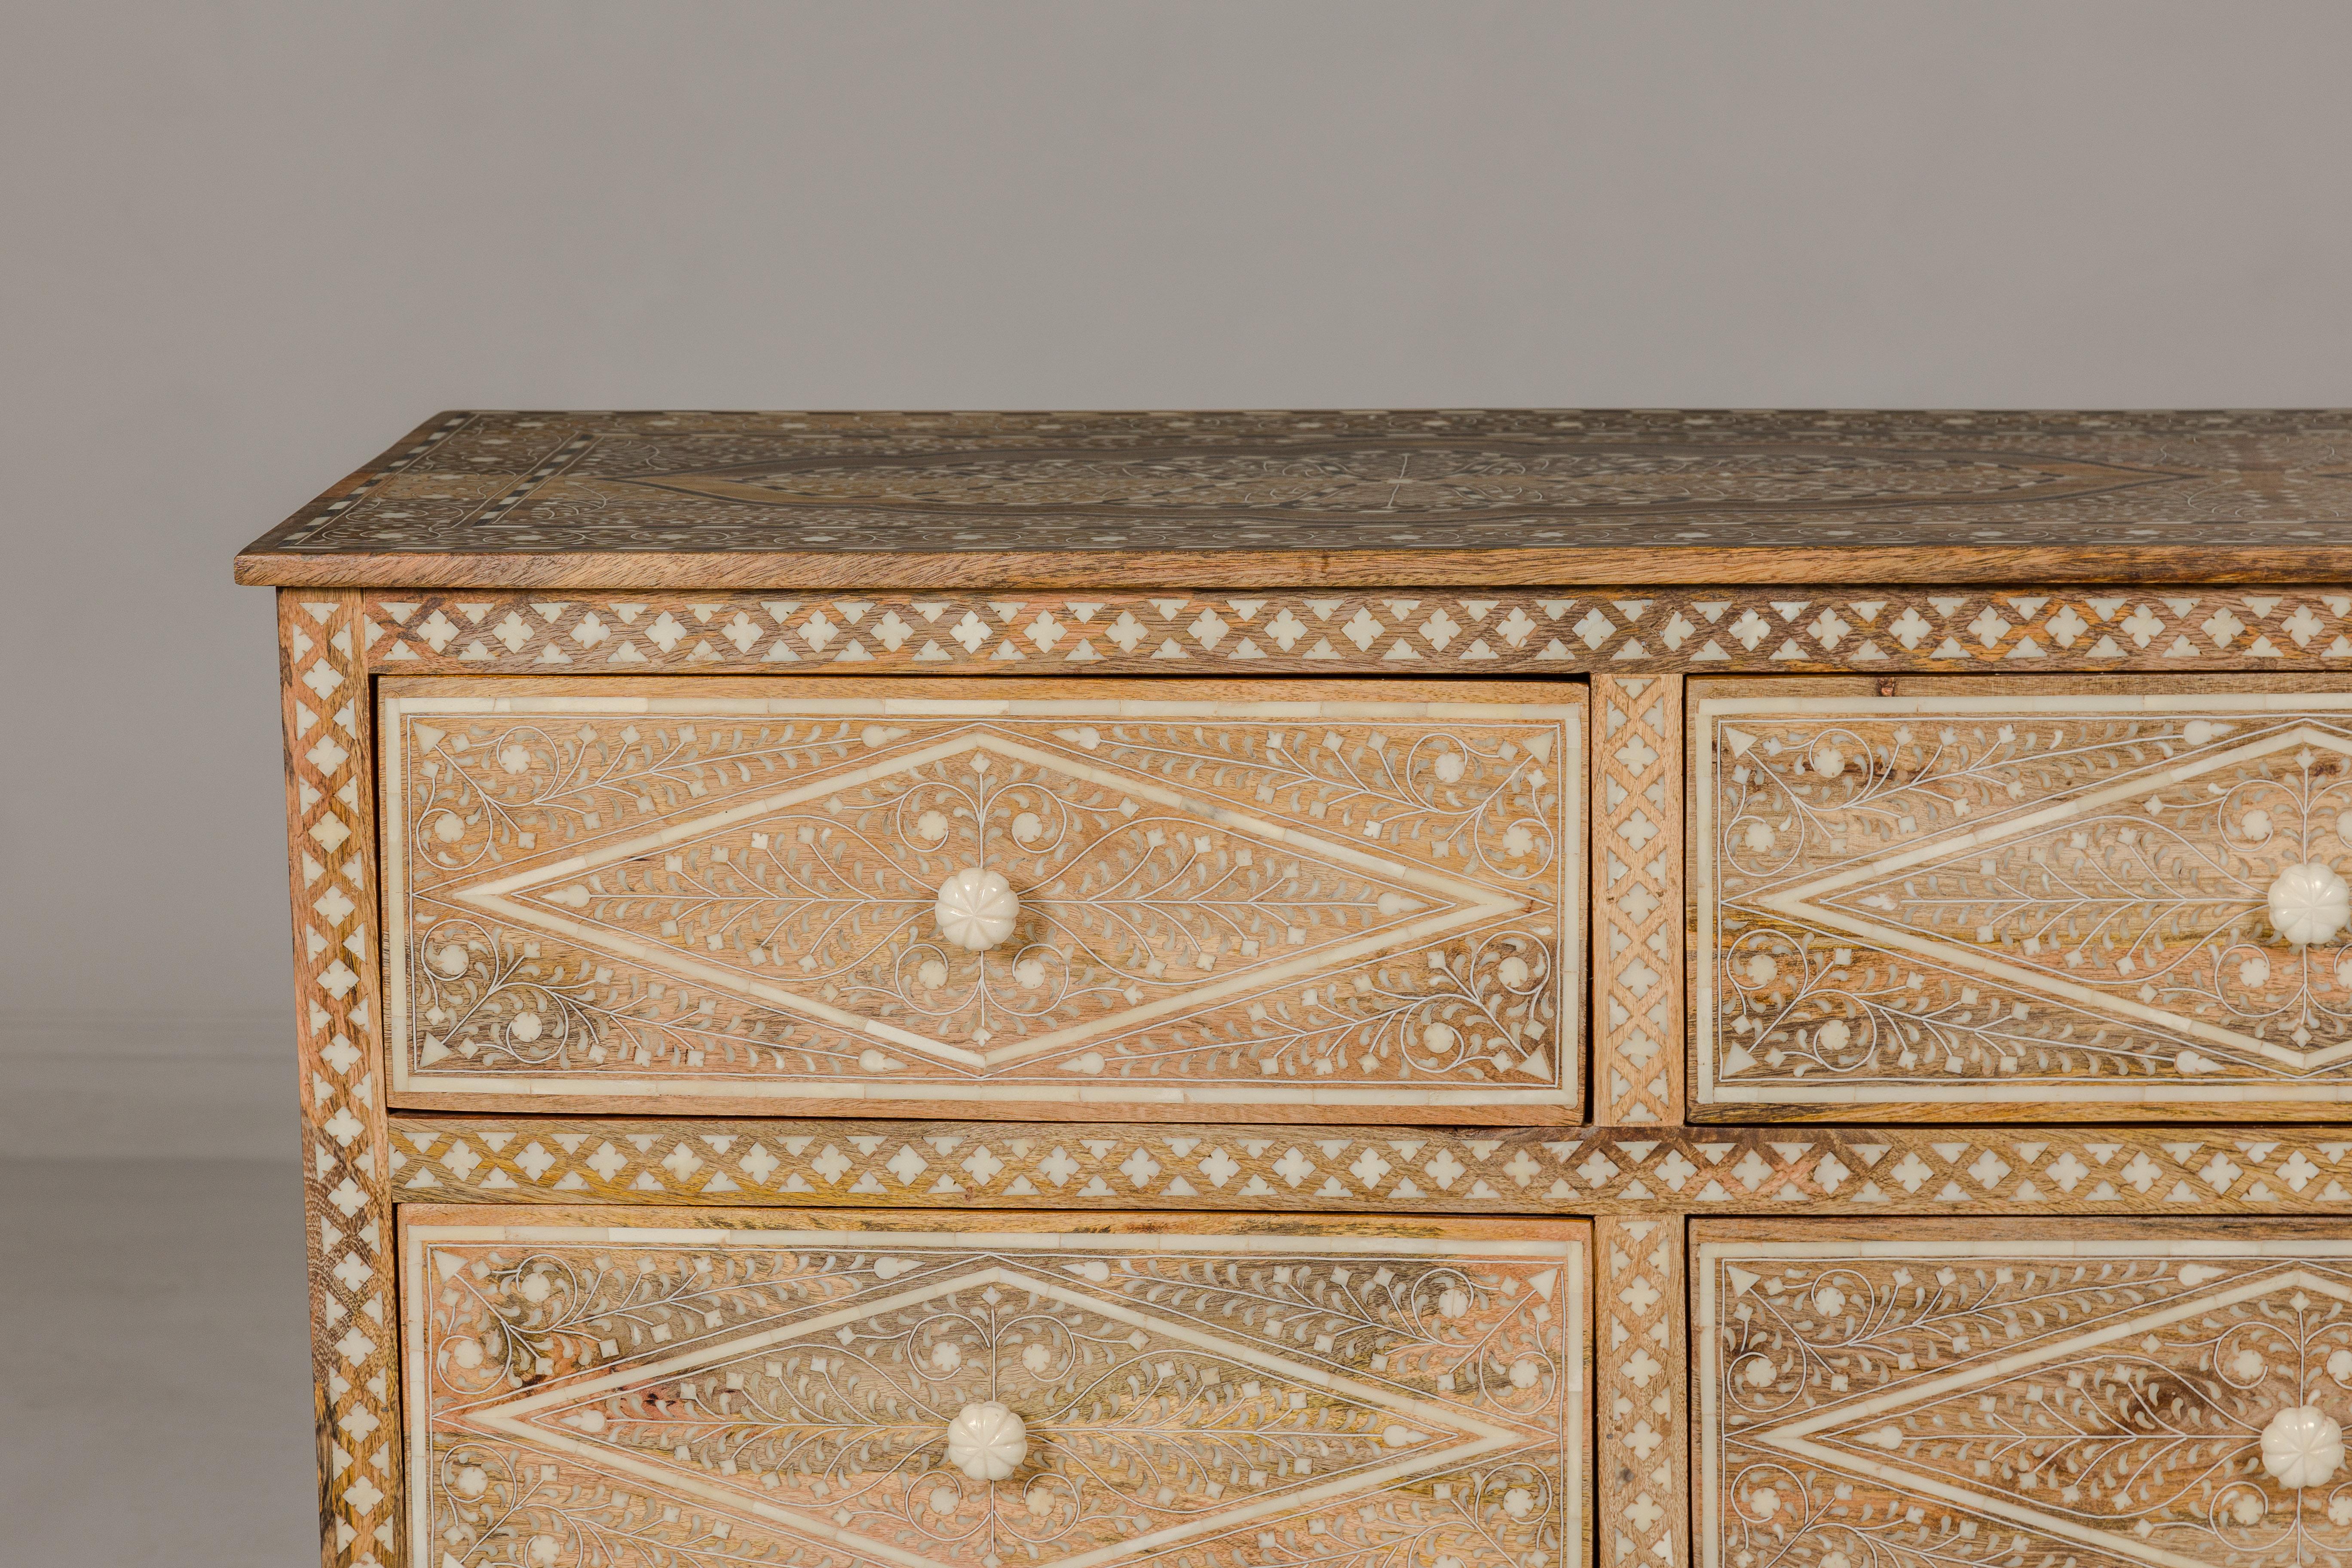 Carved Anglo-Indian Style Mango Wood Dresser with Eight Drawers and Floral Bone Inlay